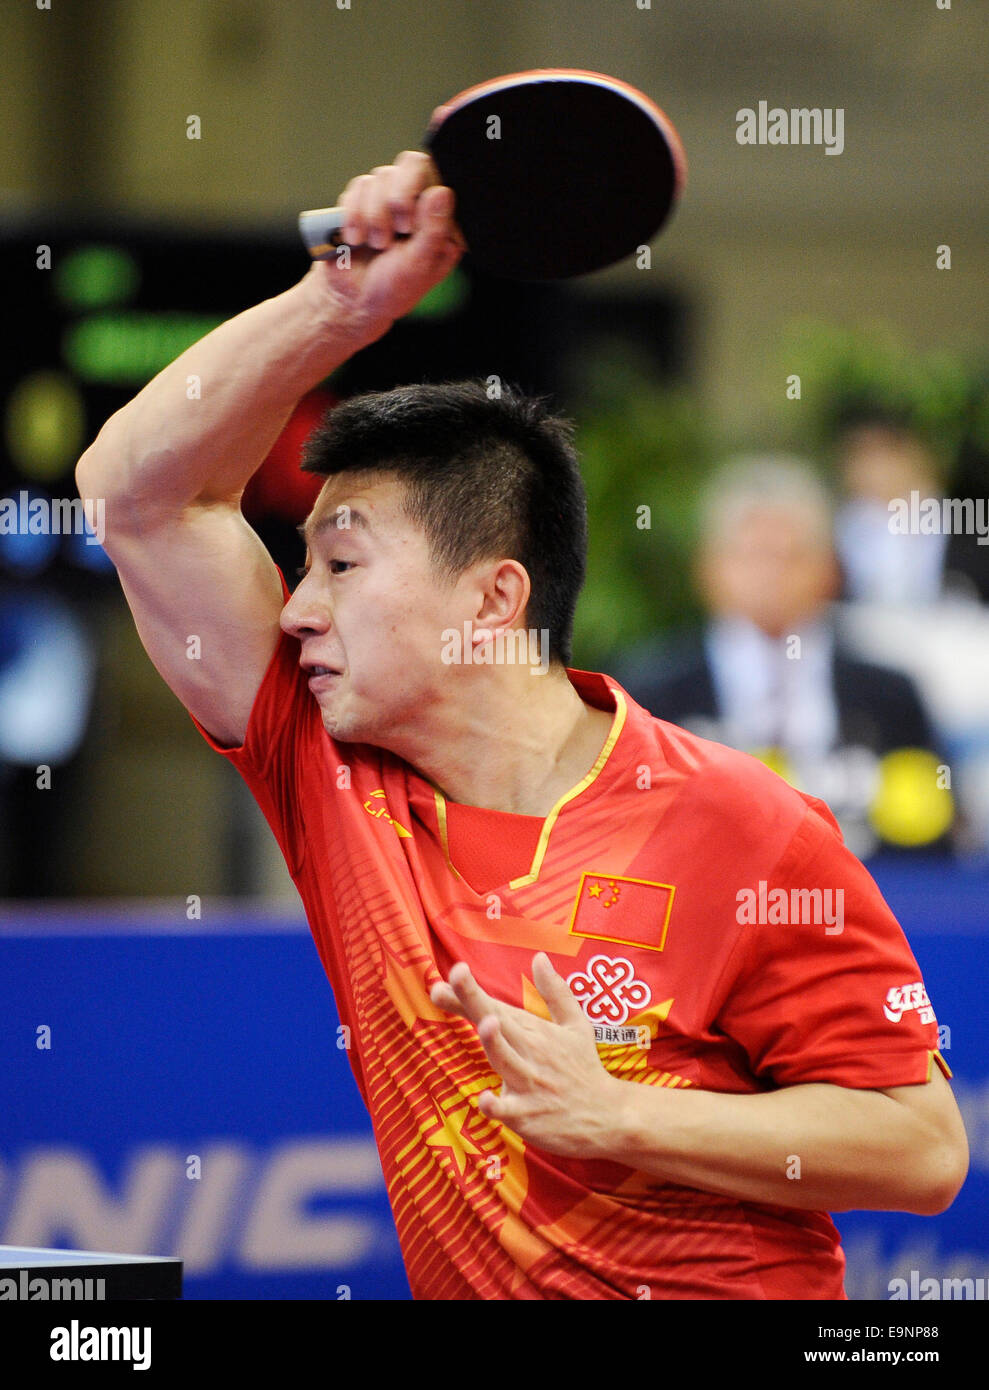 ISS Arena Duesseldorf, Germany 16.10.2014, Liebherr Tabletennis World Cup , Ma Long (CHN) Stock Photo